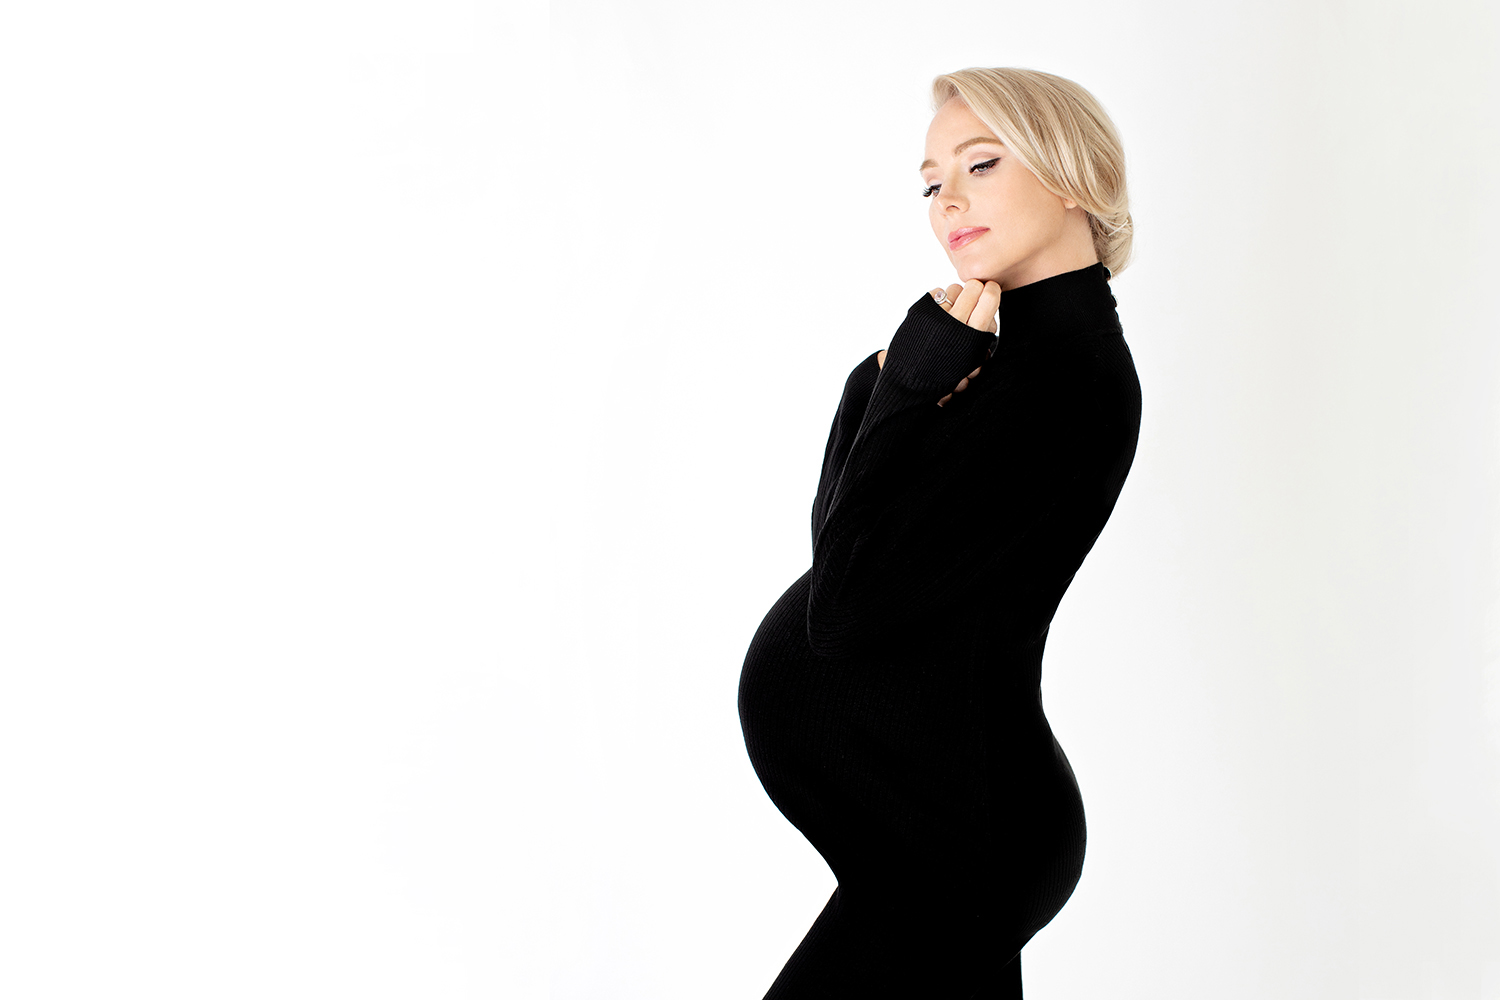 FASHION MATERNITY IMAGE OF PREGNANT WOMAN WITH UPDO HAIRSTYLE